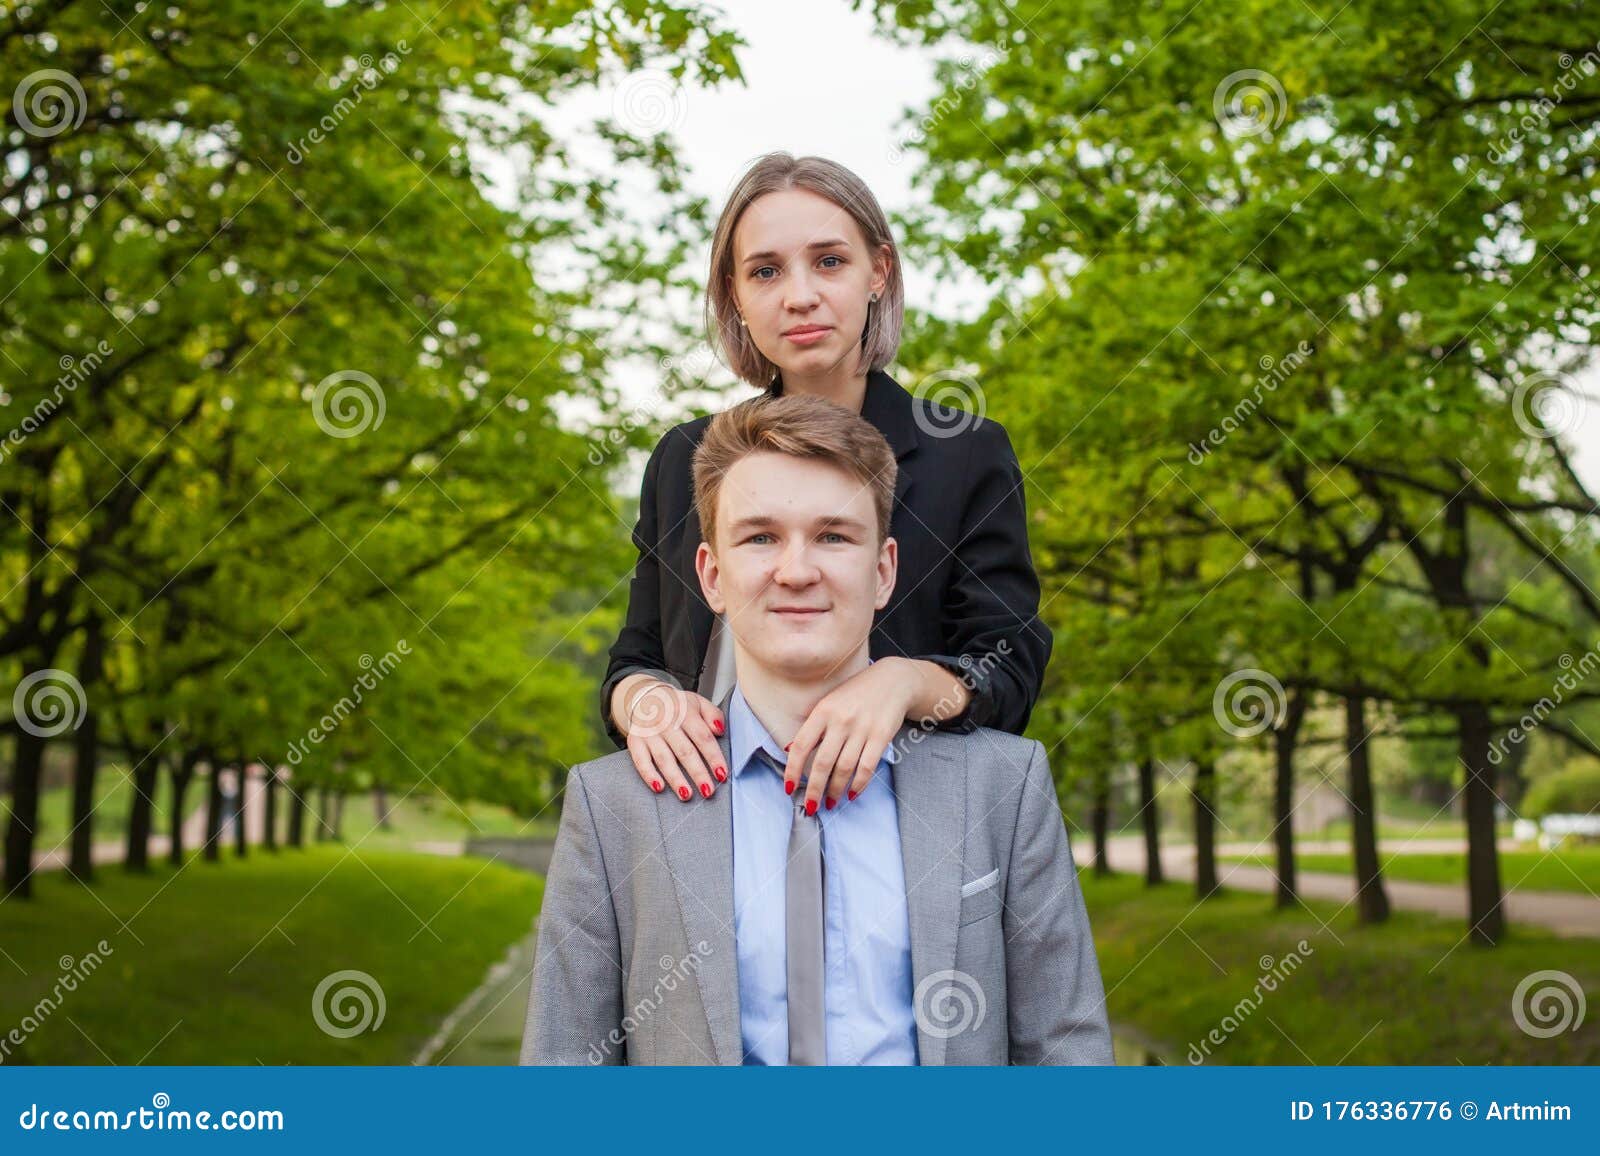 Lovely Teen Couple Together Outdoor Stock Photo Image Of Girlfriend